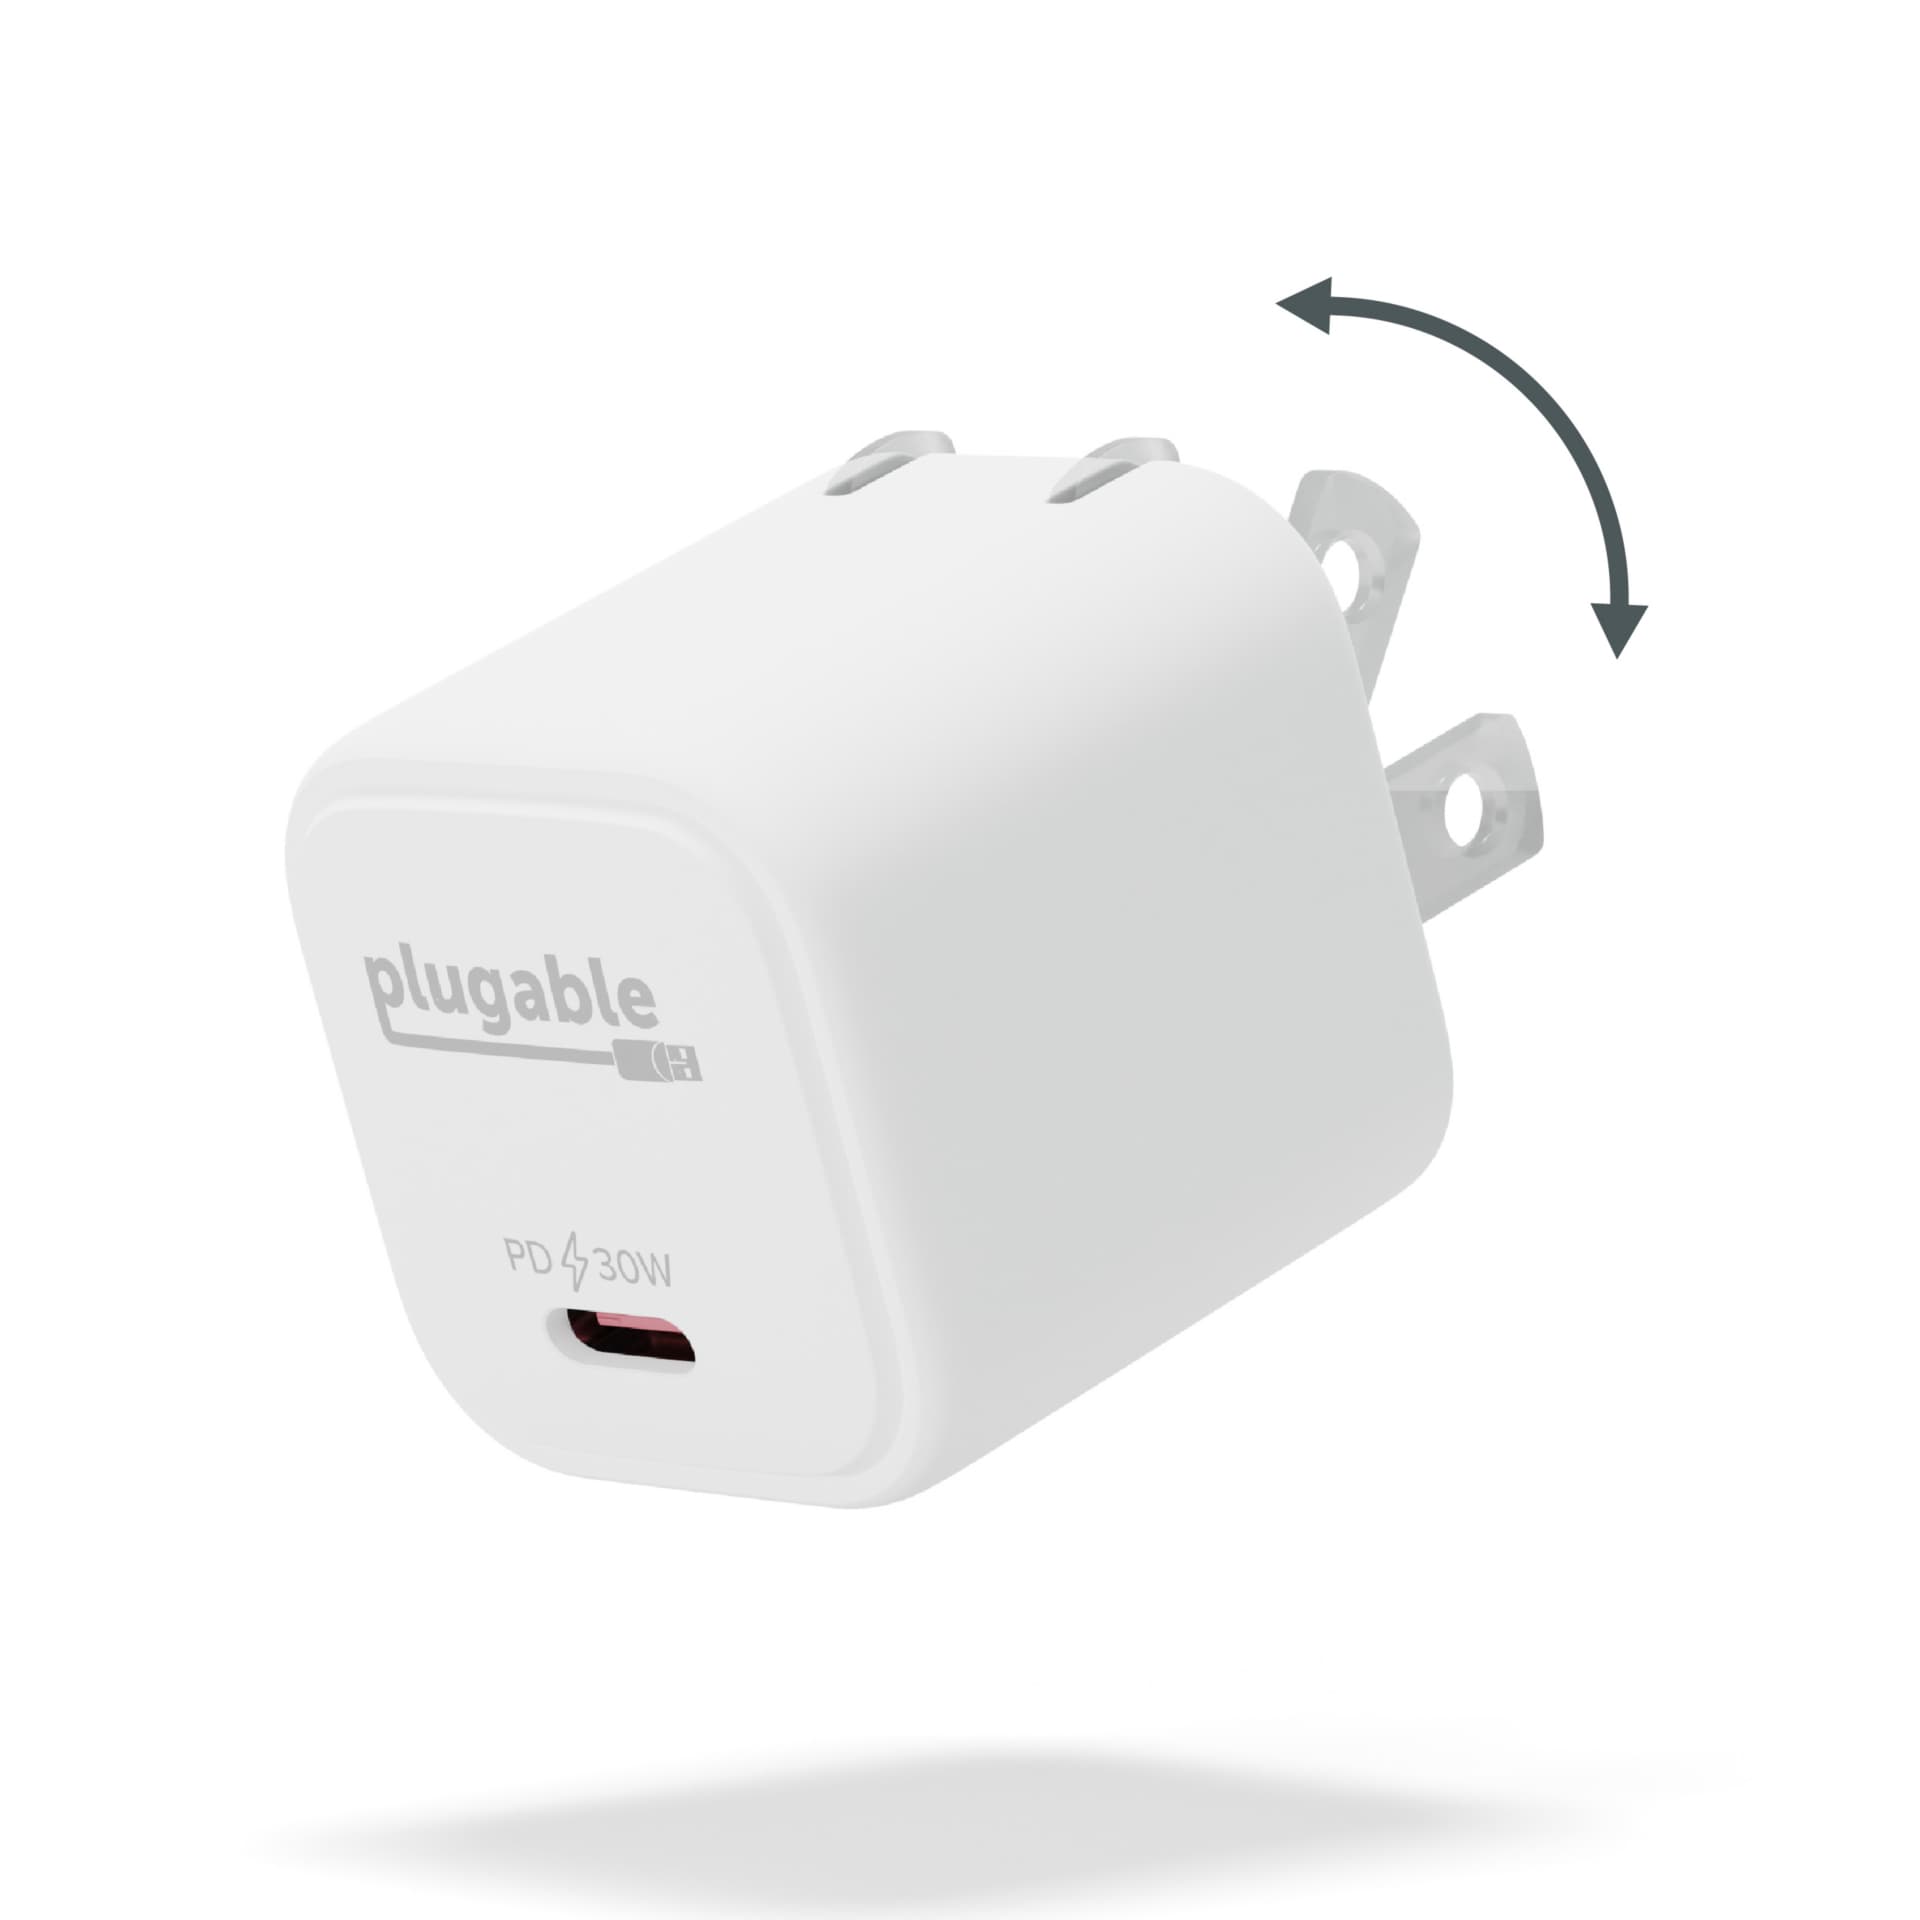 Plugable GaN 30W Portable Charger Fast Charger with Foldable Prongs - White